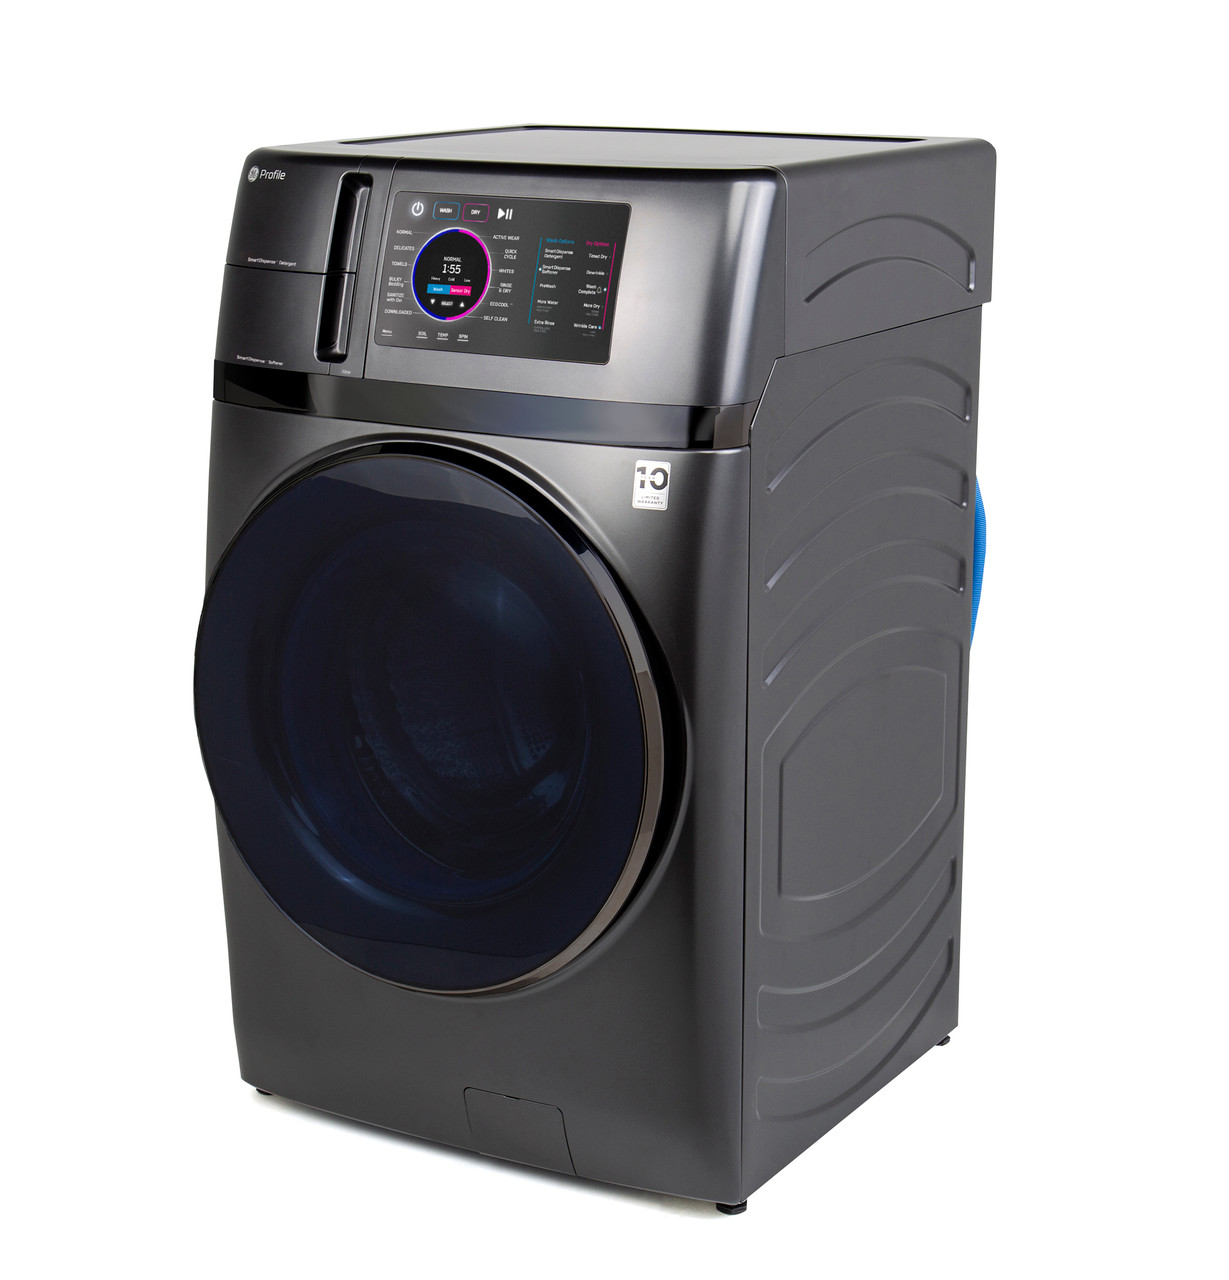 <span class="fs-5">GE Profile - UltraFast 4.8 cu ft Large Capacity All-in-One Washer/Dryer Combo with Ventless Heat Pump Technology</span>